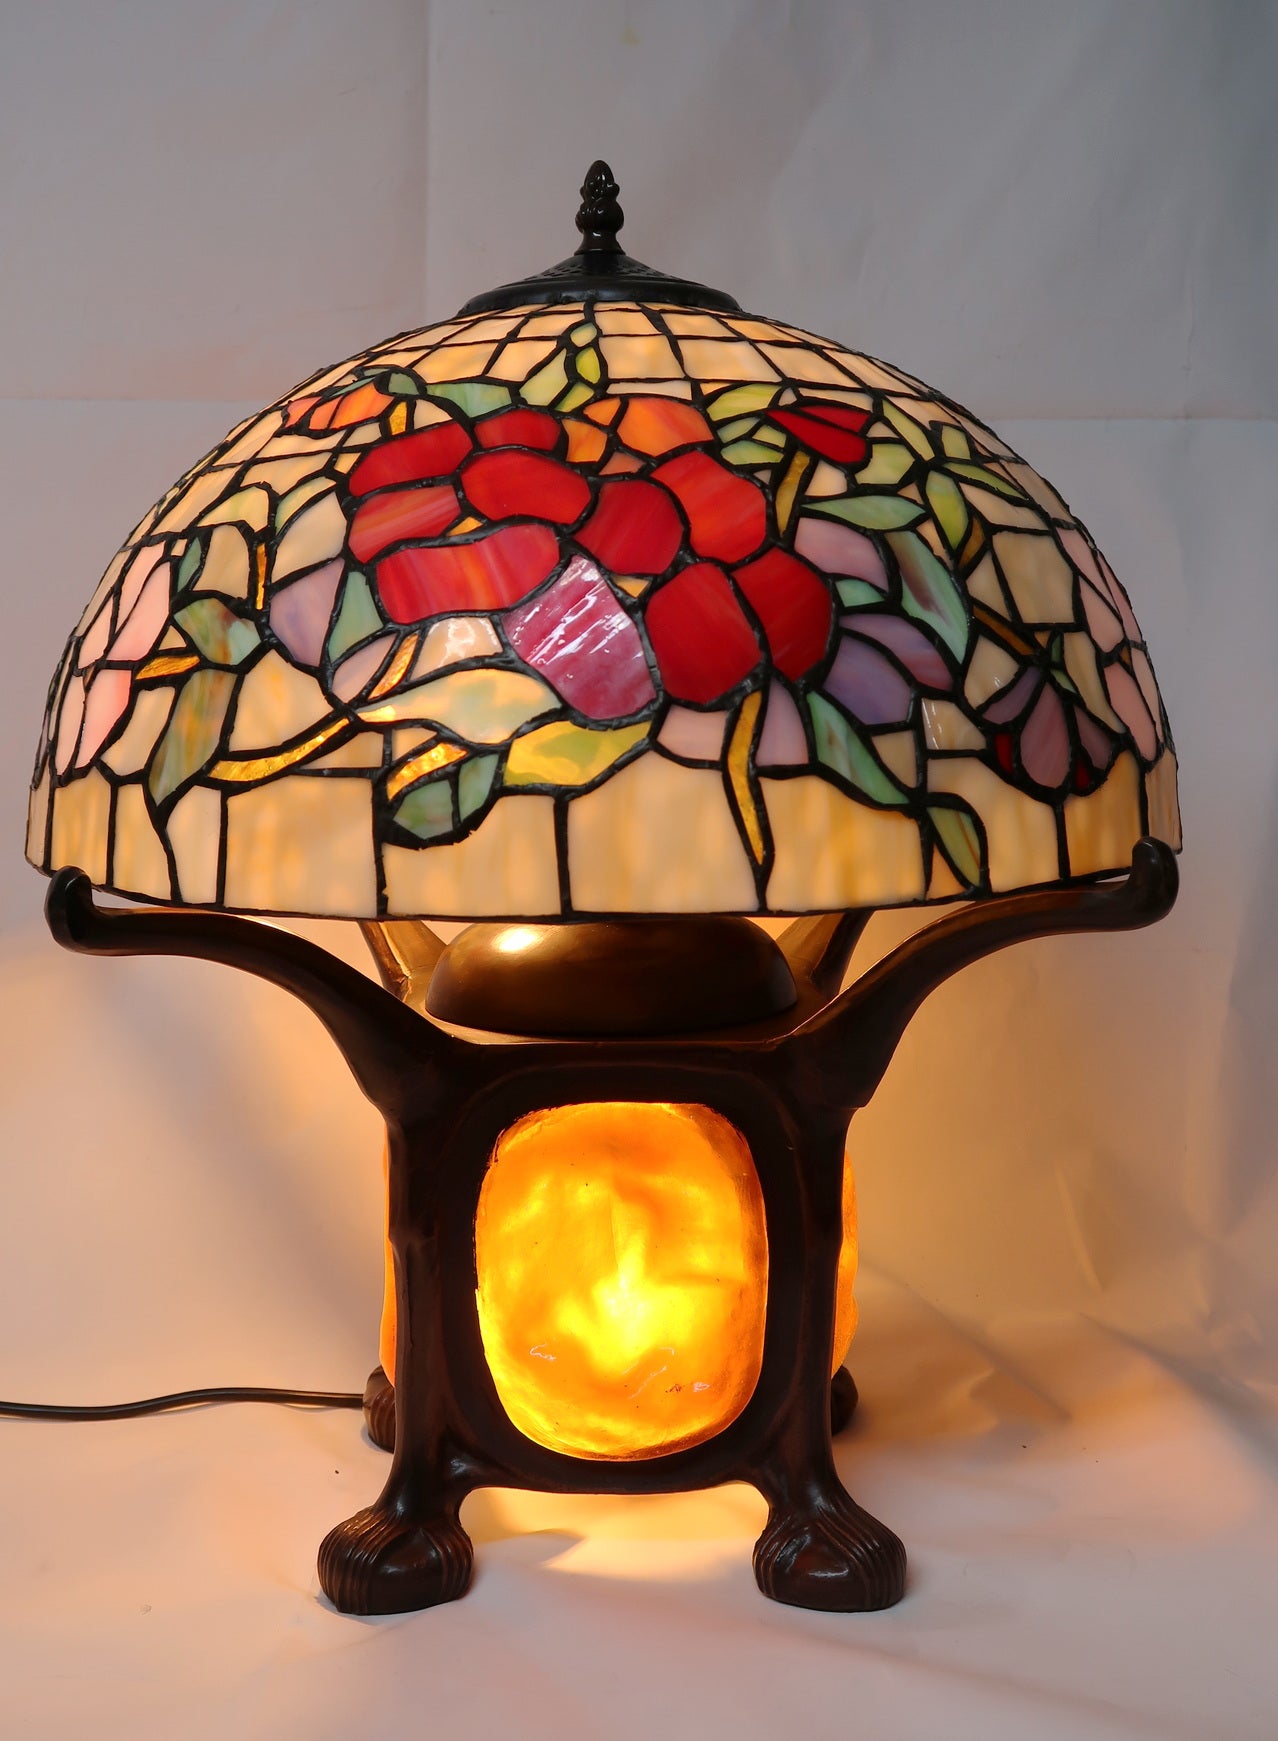 Legend Collection@Reproduction Tiffany Pansy Table Lamp  With "Turtleback Tile" Lighted base